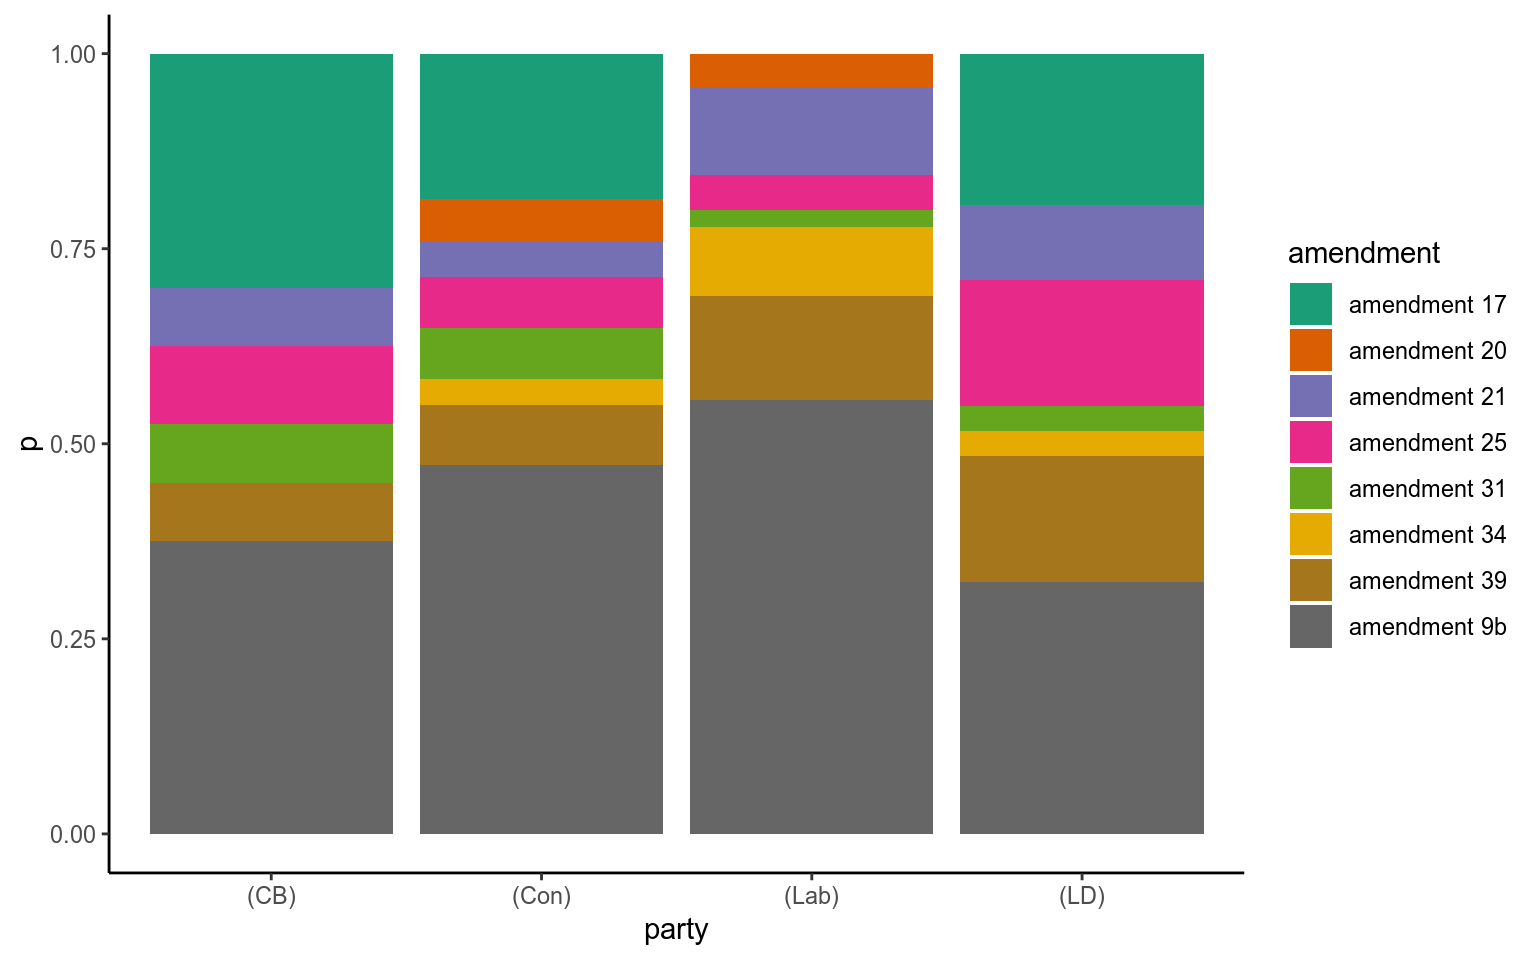 Cross-party proportion of mentions of for each amendment.